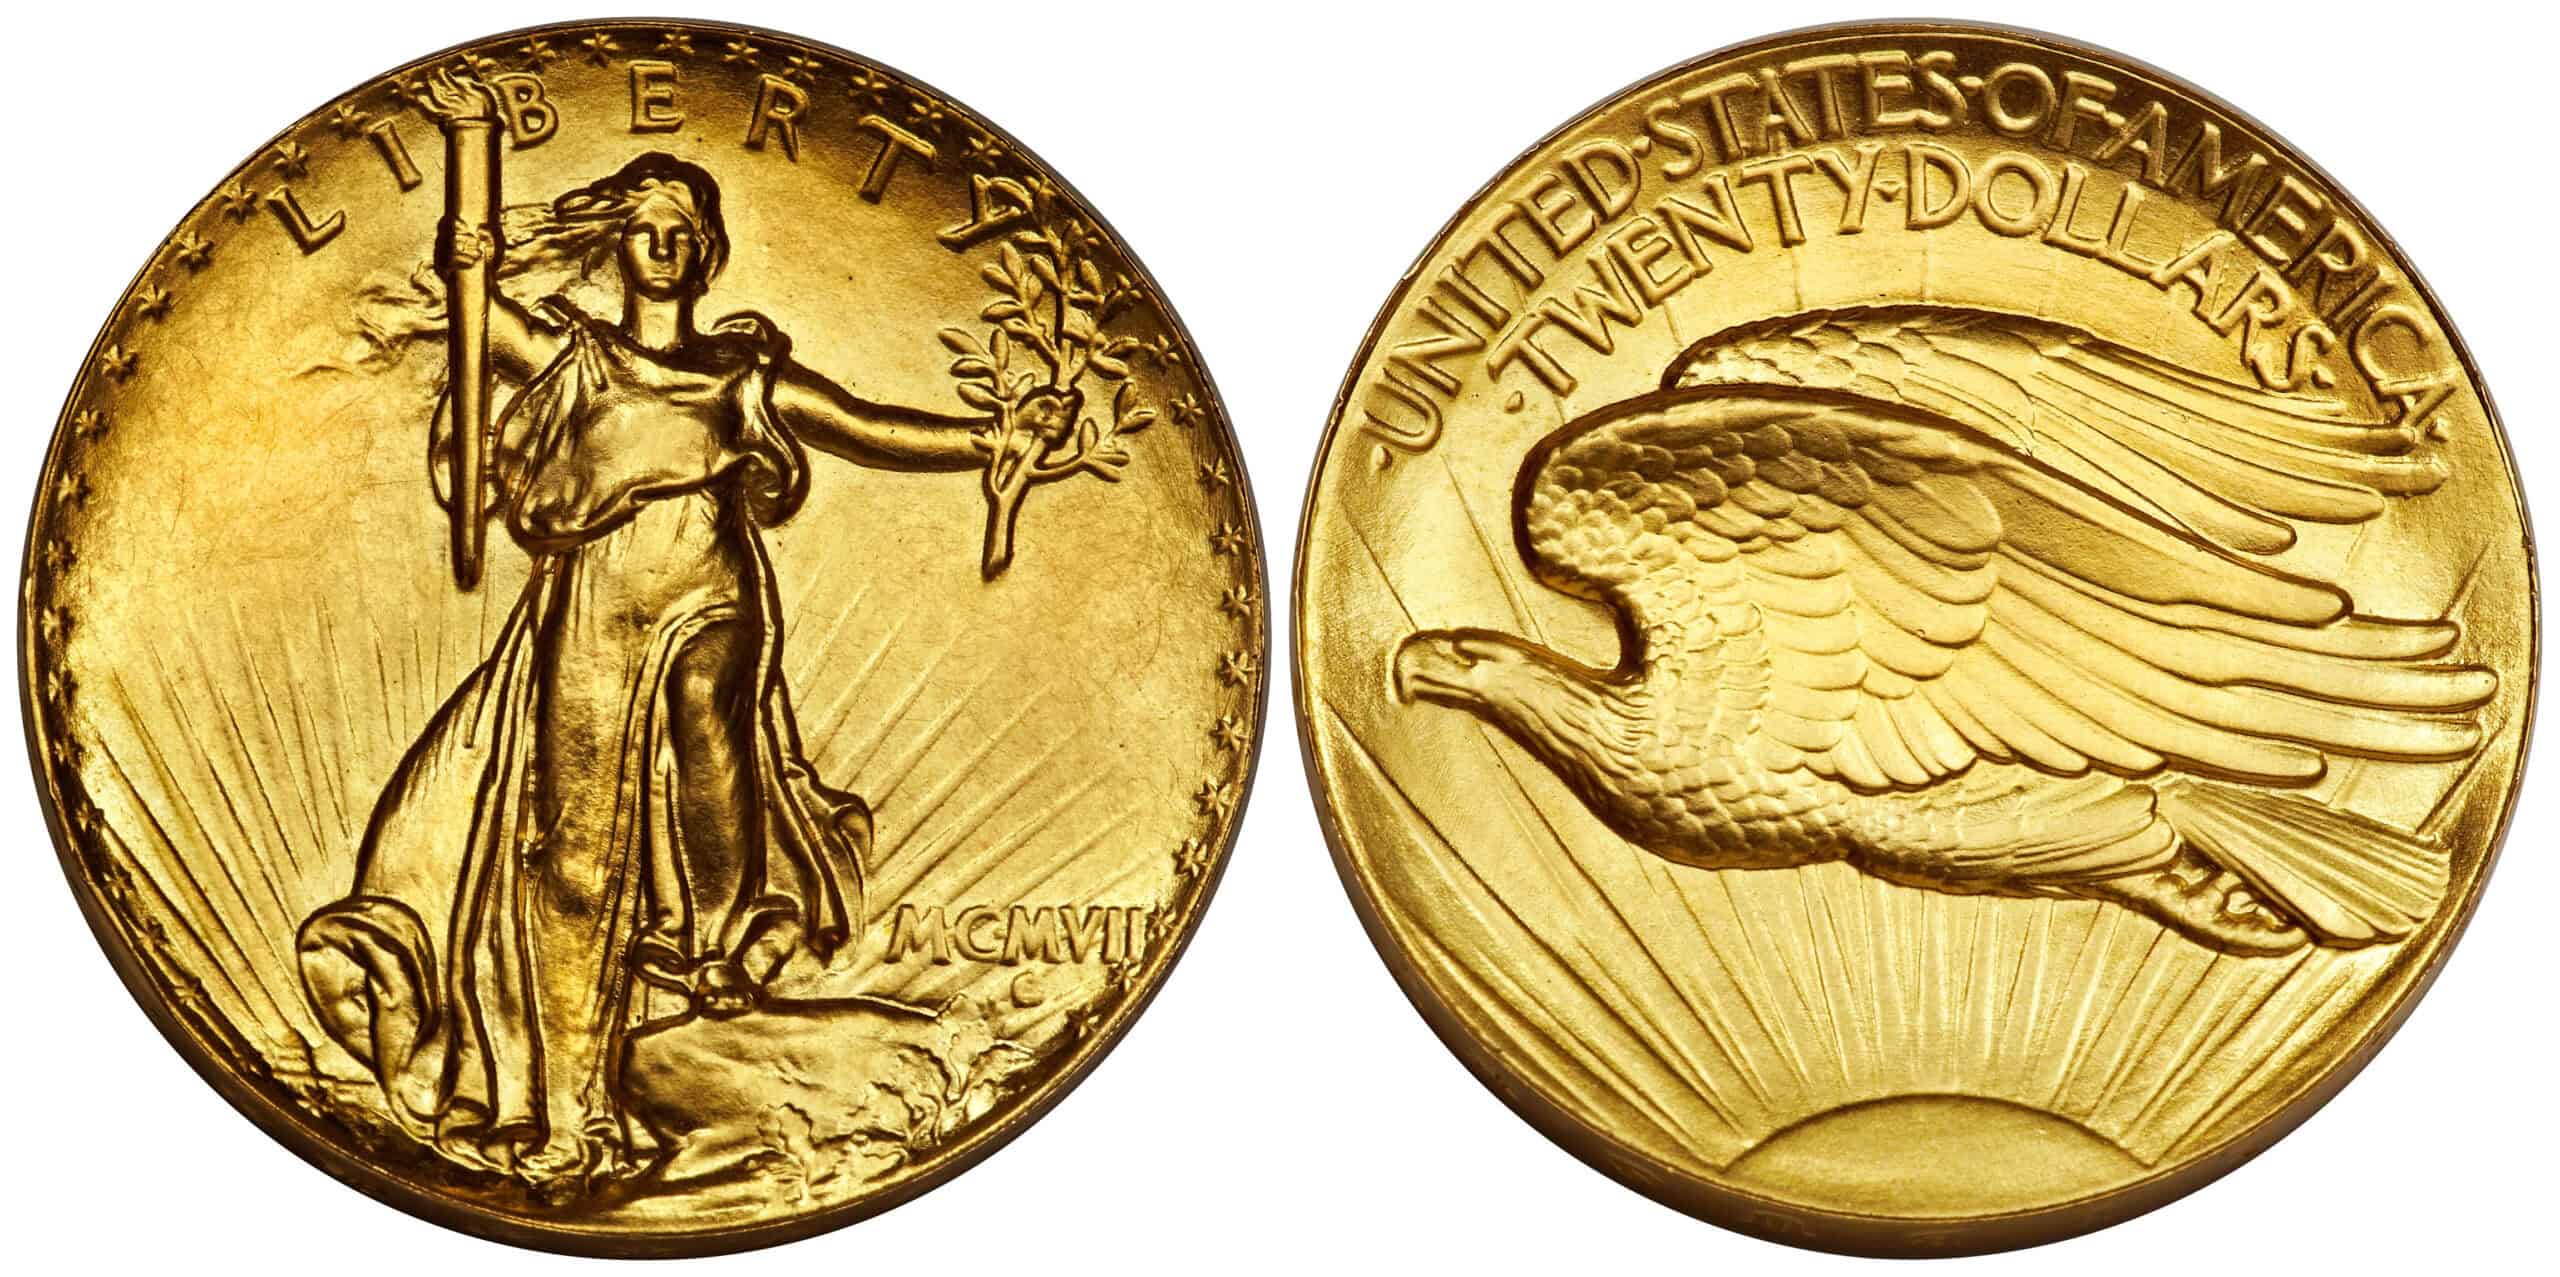 1907 Ultra High Relief Double Eagle